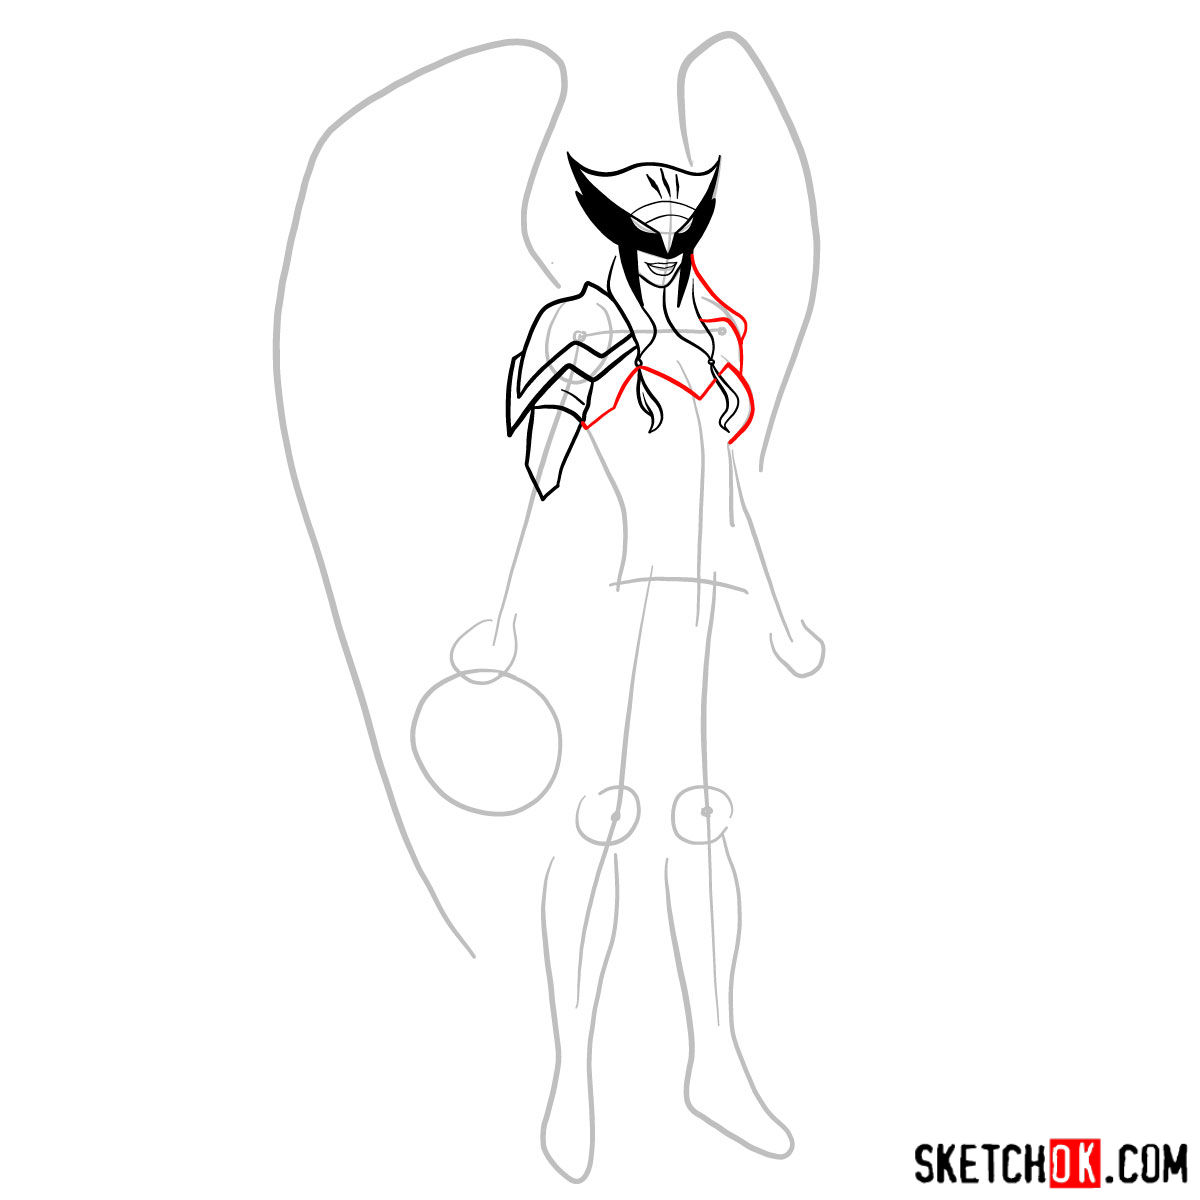 How to draw Hawkgirl DC superheroine - step 07